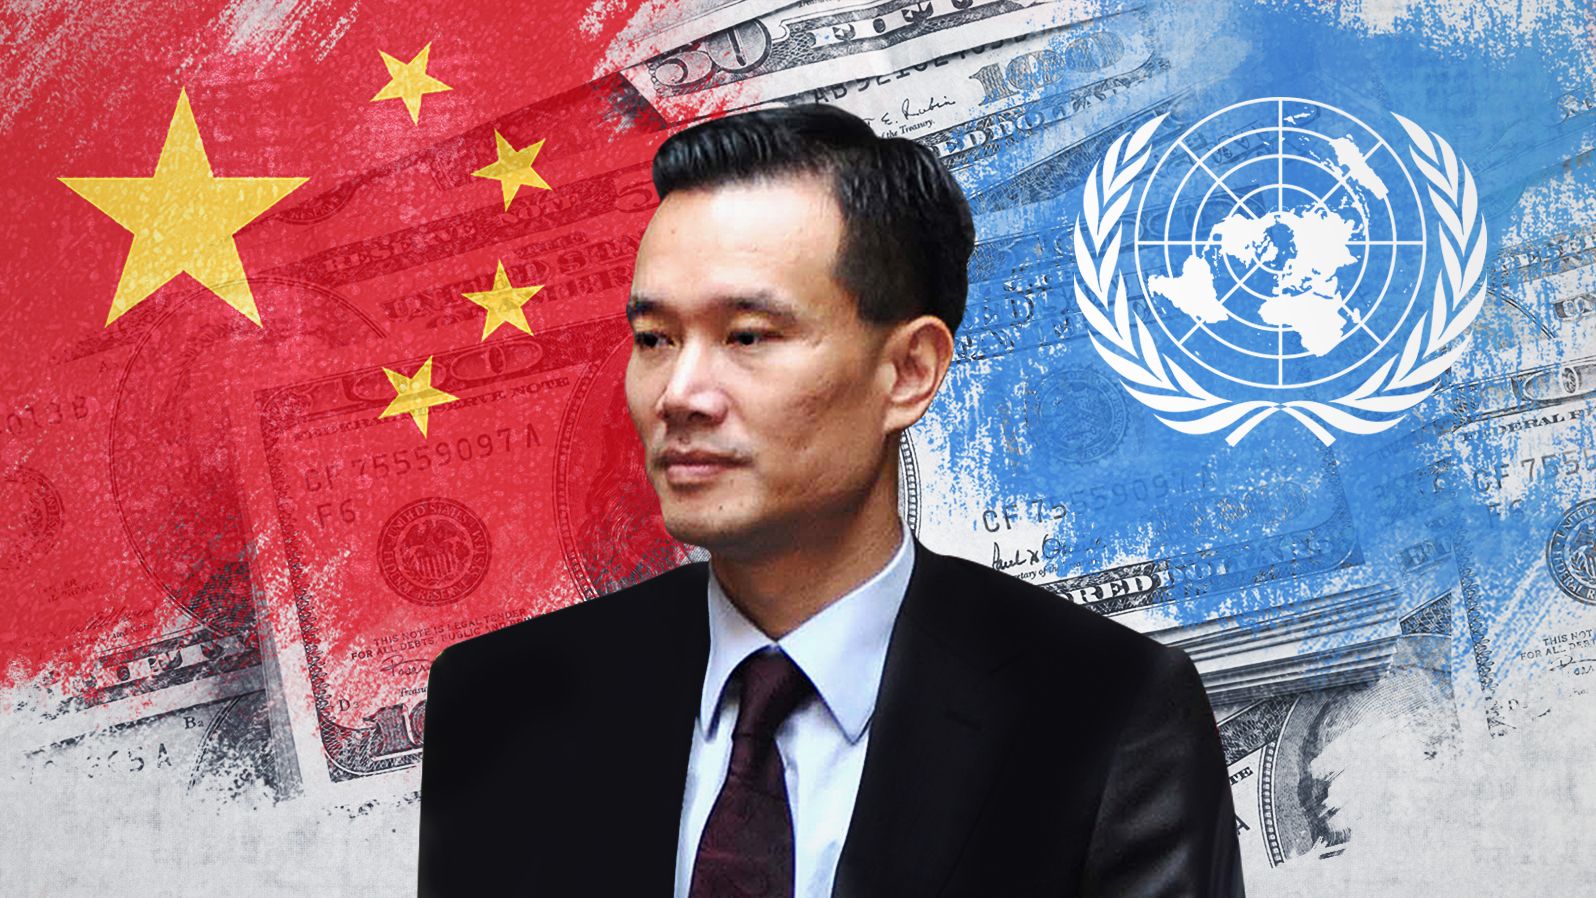 RELATED ARTICLE: <a href="https://www.cnn.com/interactive/2018/12/asia/patrick-ho-ye-jianming-cefc-trial-intl/" target="blank">The rise and fall of a Belt and Road billionaire</a>